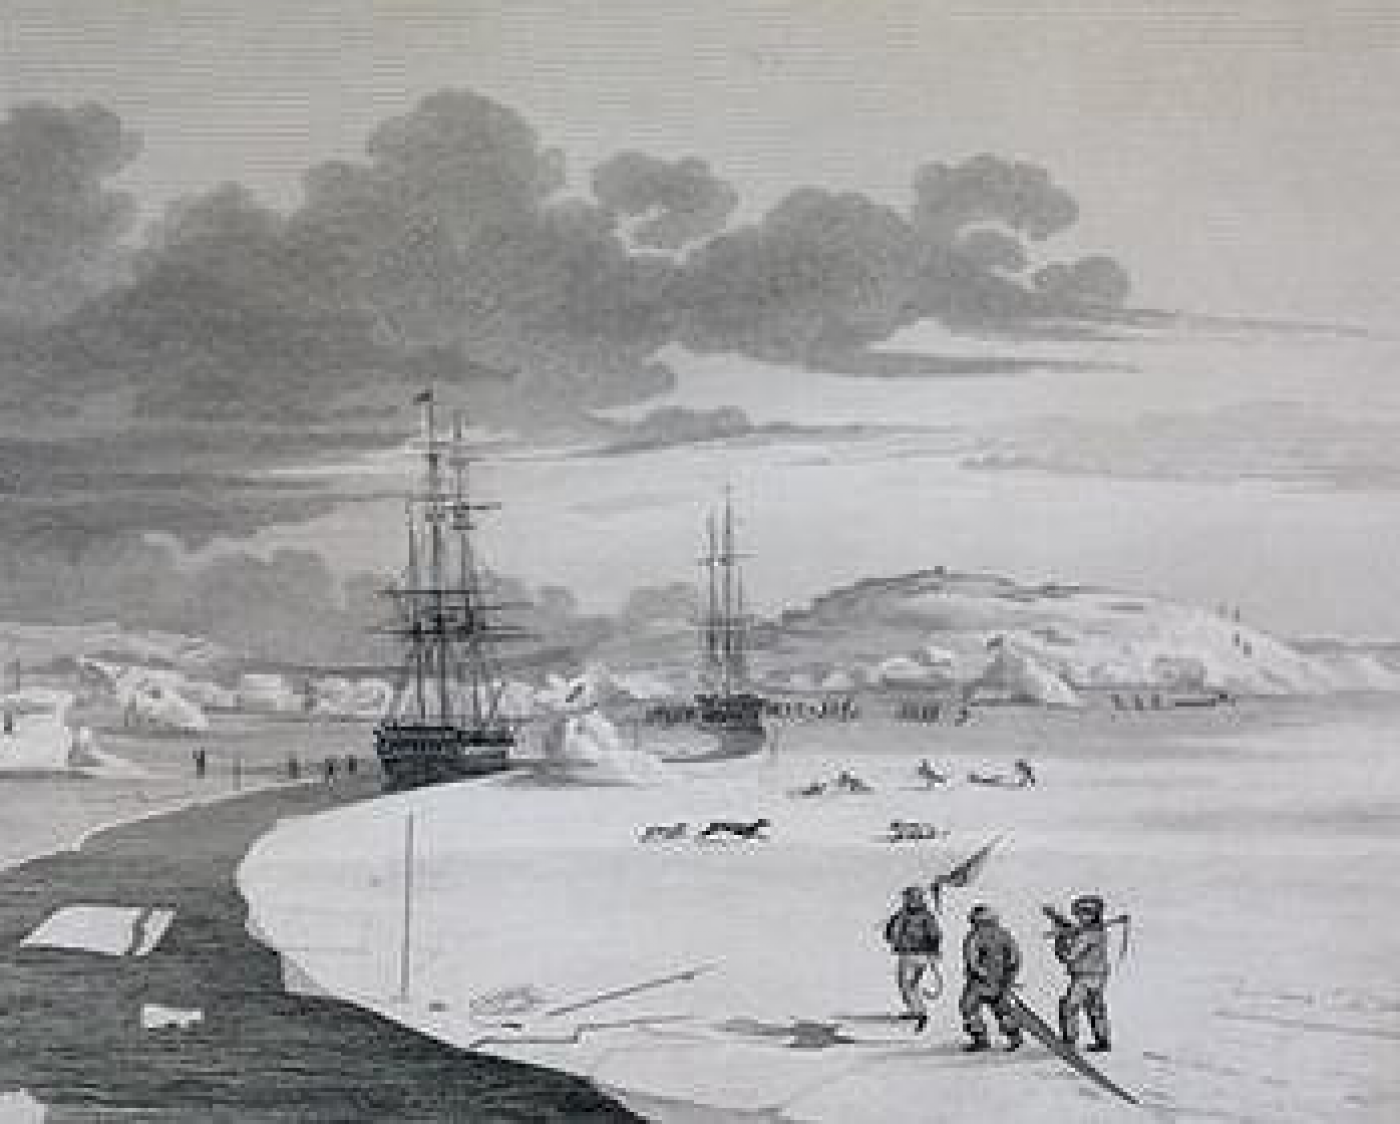 Drawn and engraved by Edward Finden from a sketch by Capt. George Francis Lyon, Cutting into Winter Island, from A Journal of a North-West Passage by Capt. Parry (London, 1824) (Courtesy of Wikigallery)